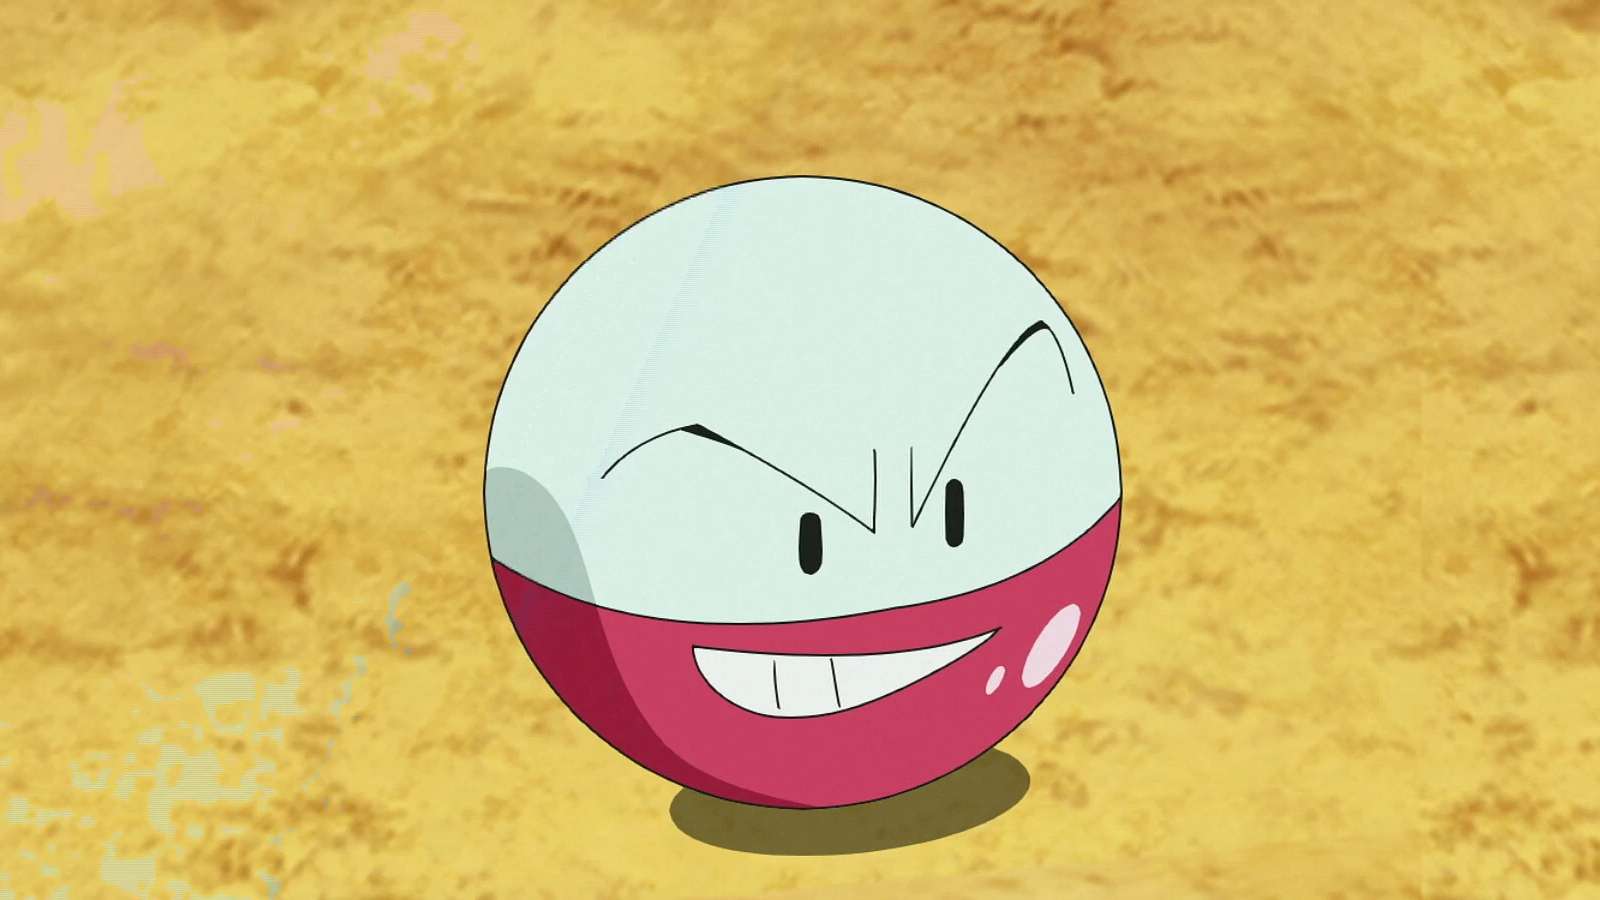 Electrode in the Pokemon anime